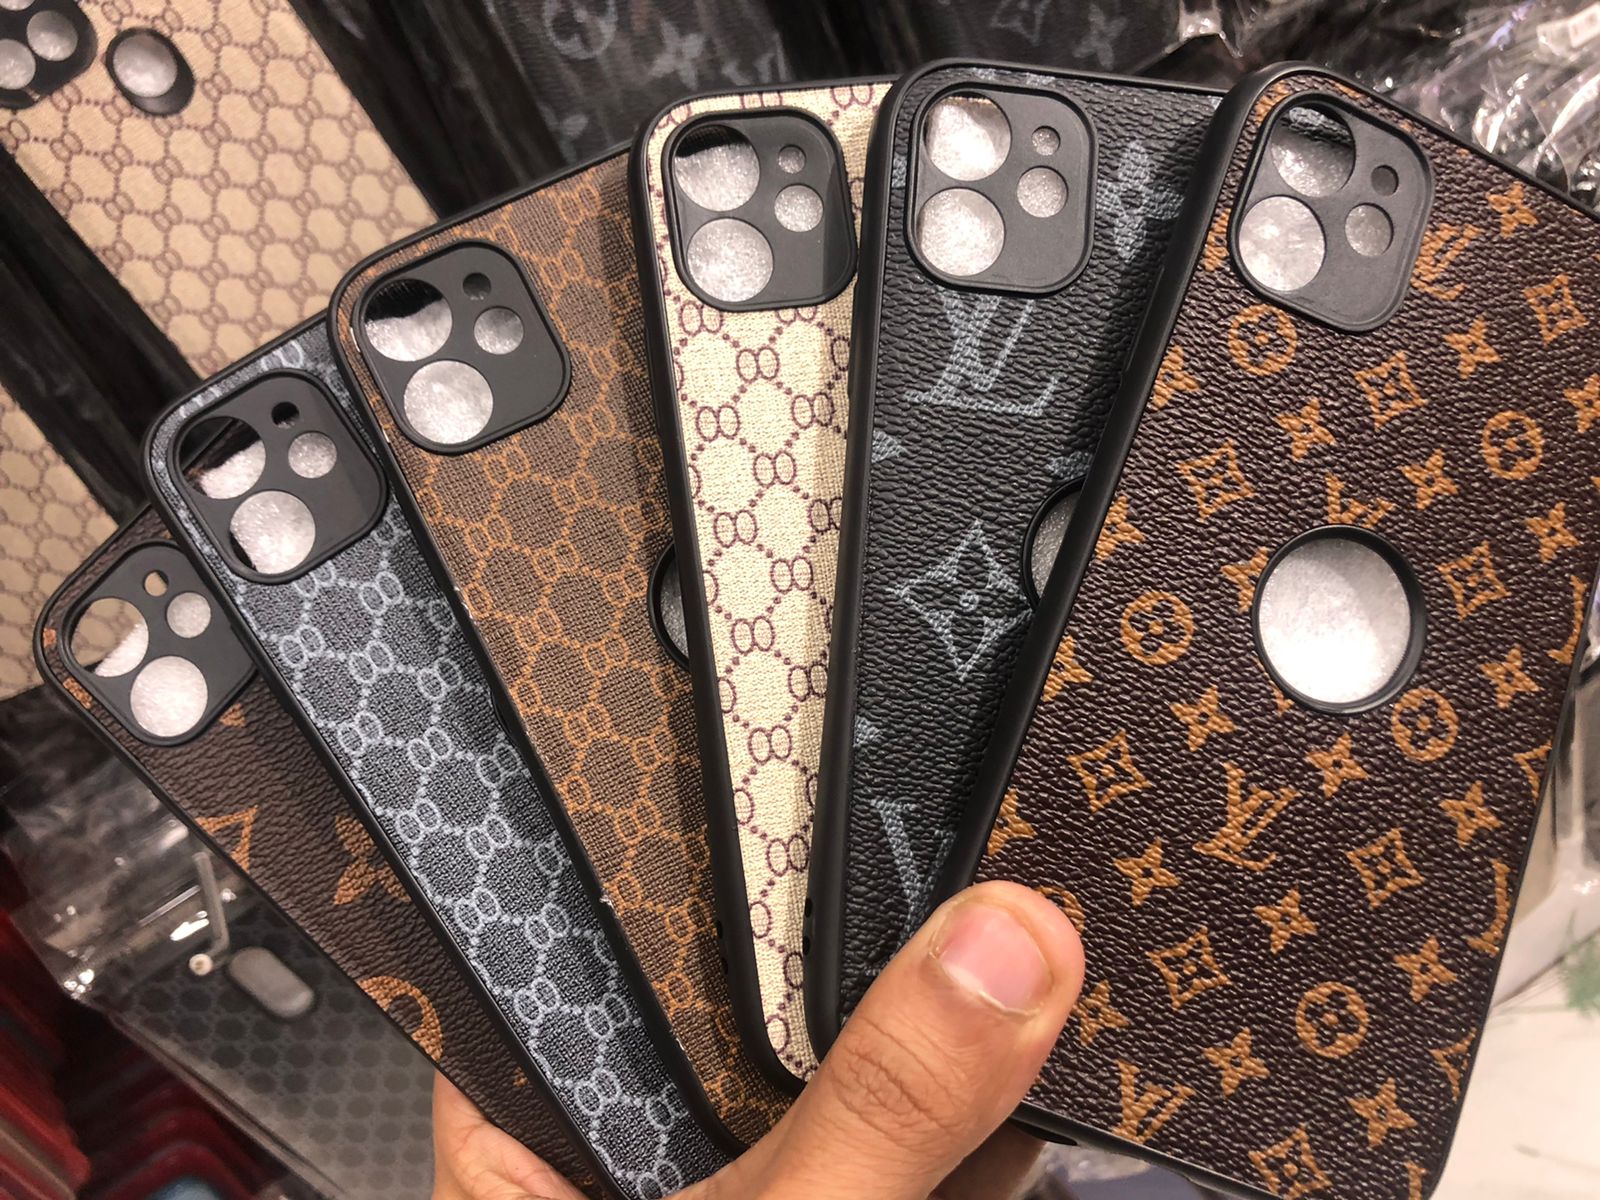 lv phone covers